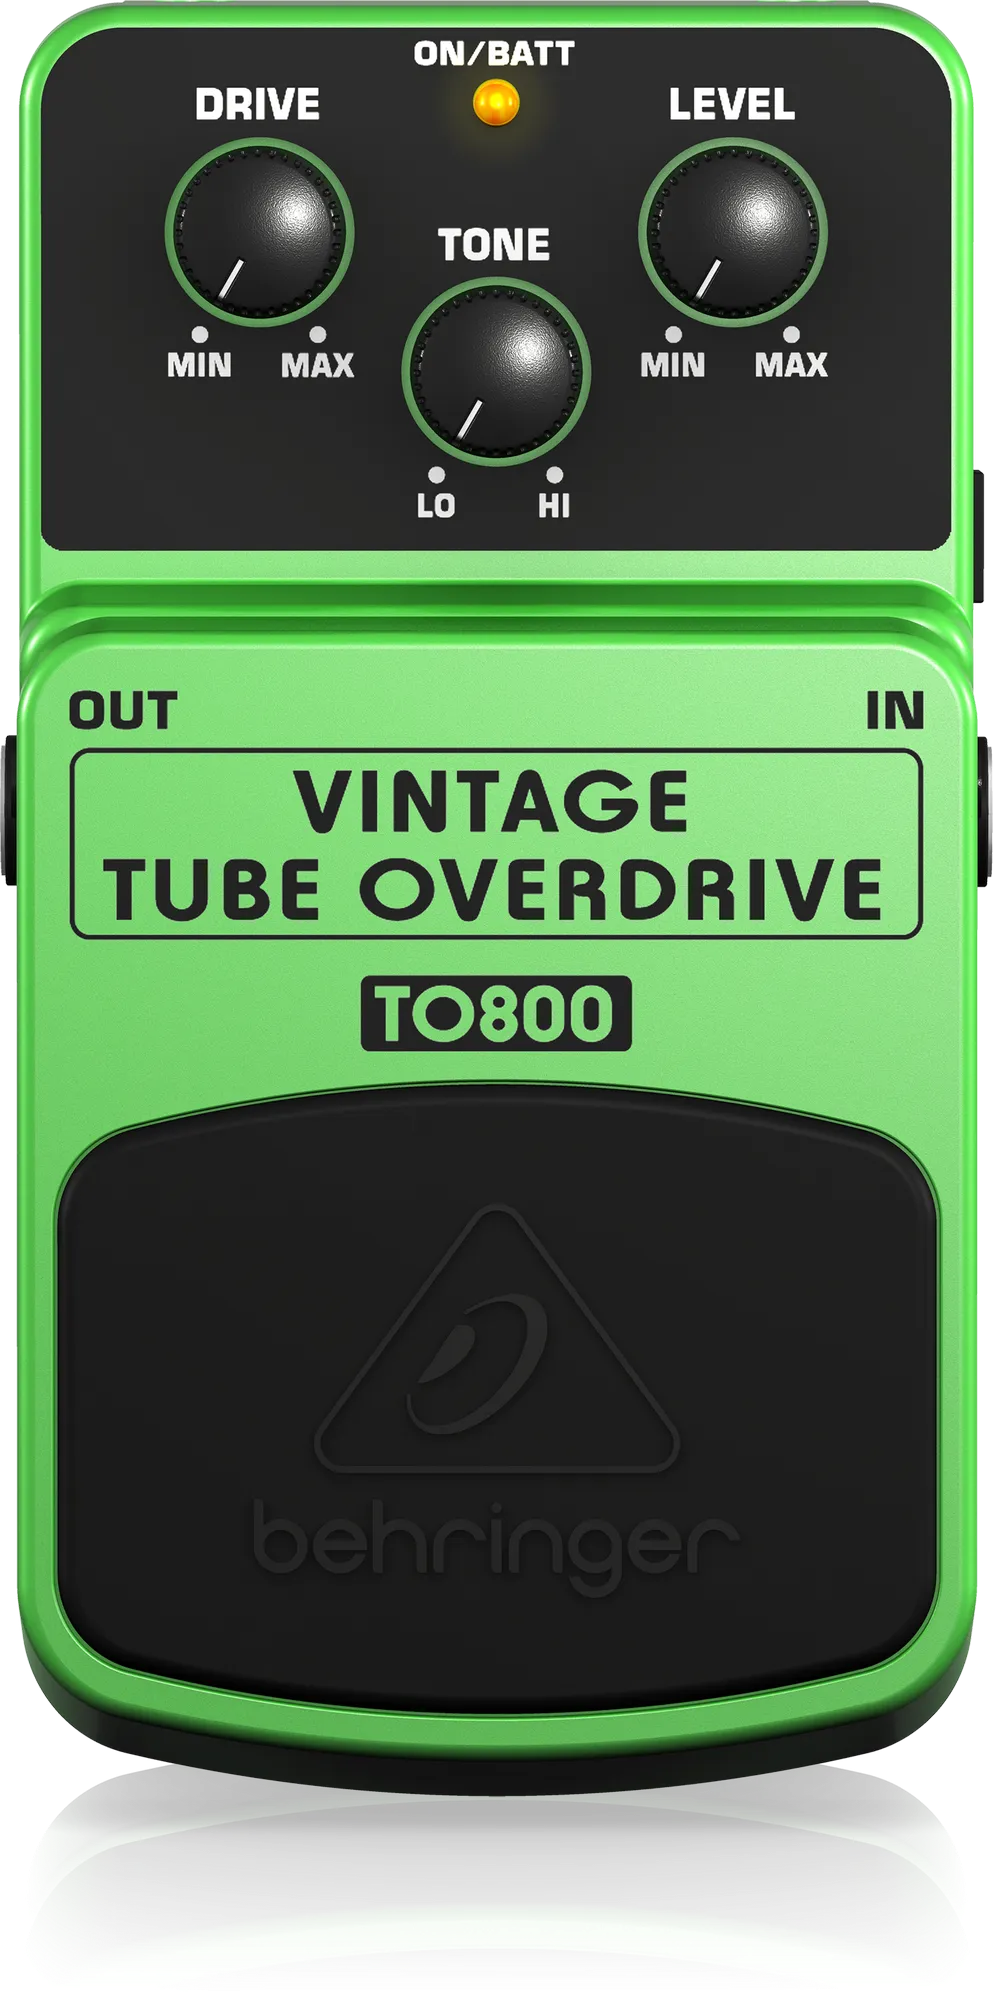 TO800 Vintage Tube Overdrive Guitar Pedal By Behringer